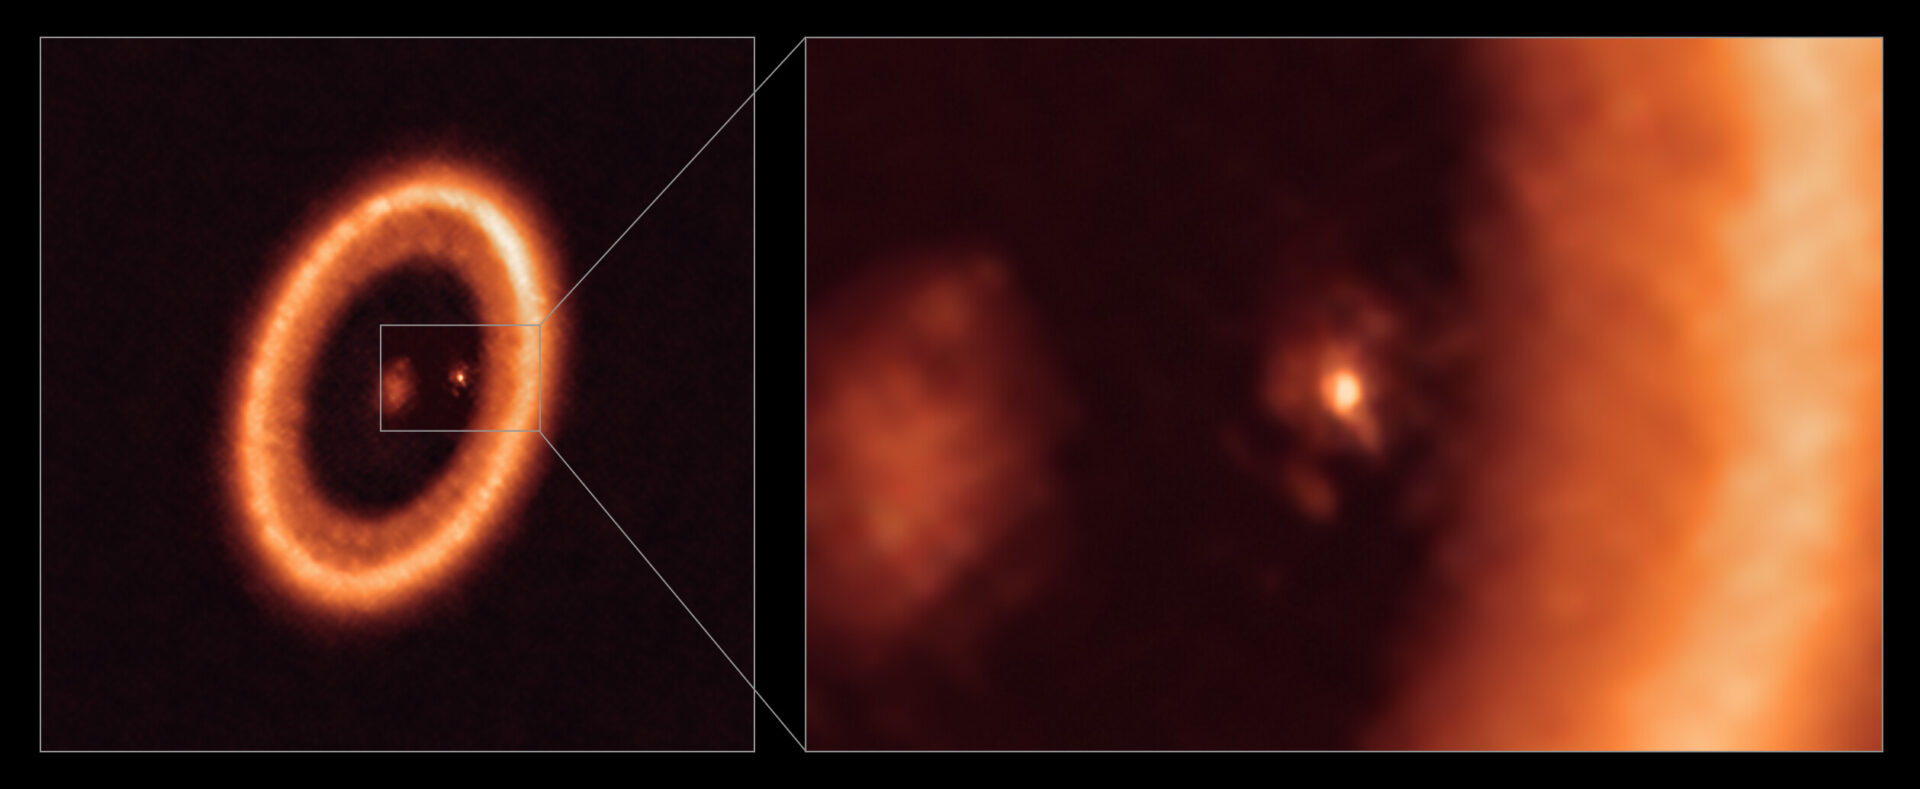 This image, taken with the Atacama Large Millimeter/submillimeter Array (ALMA), in which ESO is a partner, shows wide (left) and close-up (right) views of the moon-forming disc surrounding PDS 70c, a young Jupiter-like planet nearly 400 light-years away. The close-up view shows PDS 70c and its circumplanetary disc centre-front, with the larger circumstellar ring-like disc taking up most of the right-hand side of the image. The star PDS 70 is at the centre of the wide-view image on the left. Two planets have been found in the system, PDS 70c and PDS 70b, the latter not being visible in this image. They have carved a cavity in the circumstellar disc as they gobbled up material from the disc itself, growing in size. In this process, PDS 70c acquired its own circumplanetary disc, which contributes to the growth of the planet and where moons can form. This circumplanetary disc is as large as the Sun-Earth distance and has enough mass to form up to three satellites the size of the Moon. Credit: ALMA (ESO/NAOJ/NRAO)/Benisty et al.